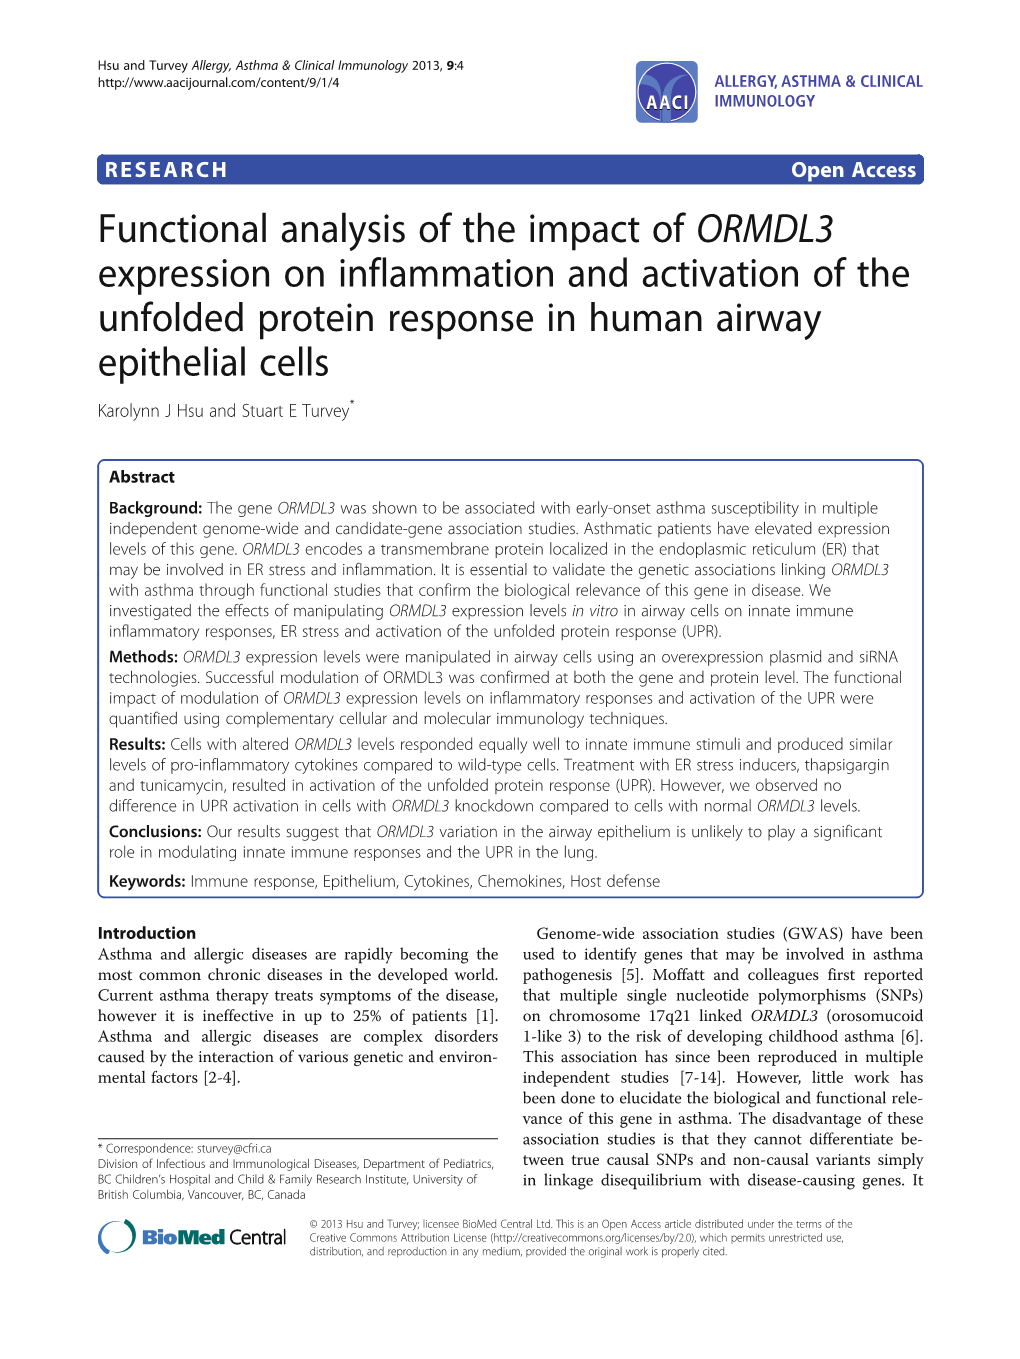 Functional Analysis of the Impact of ORMDL3 Expression On